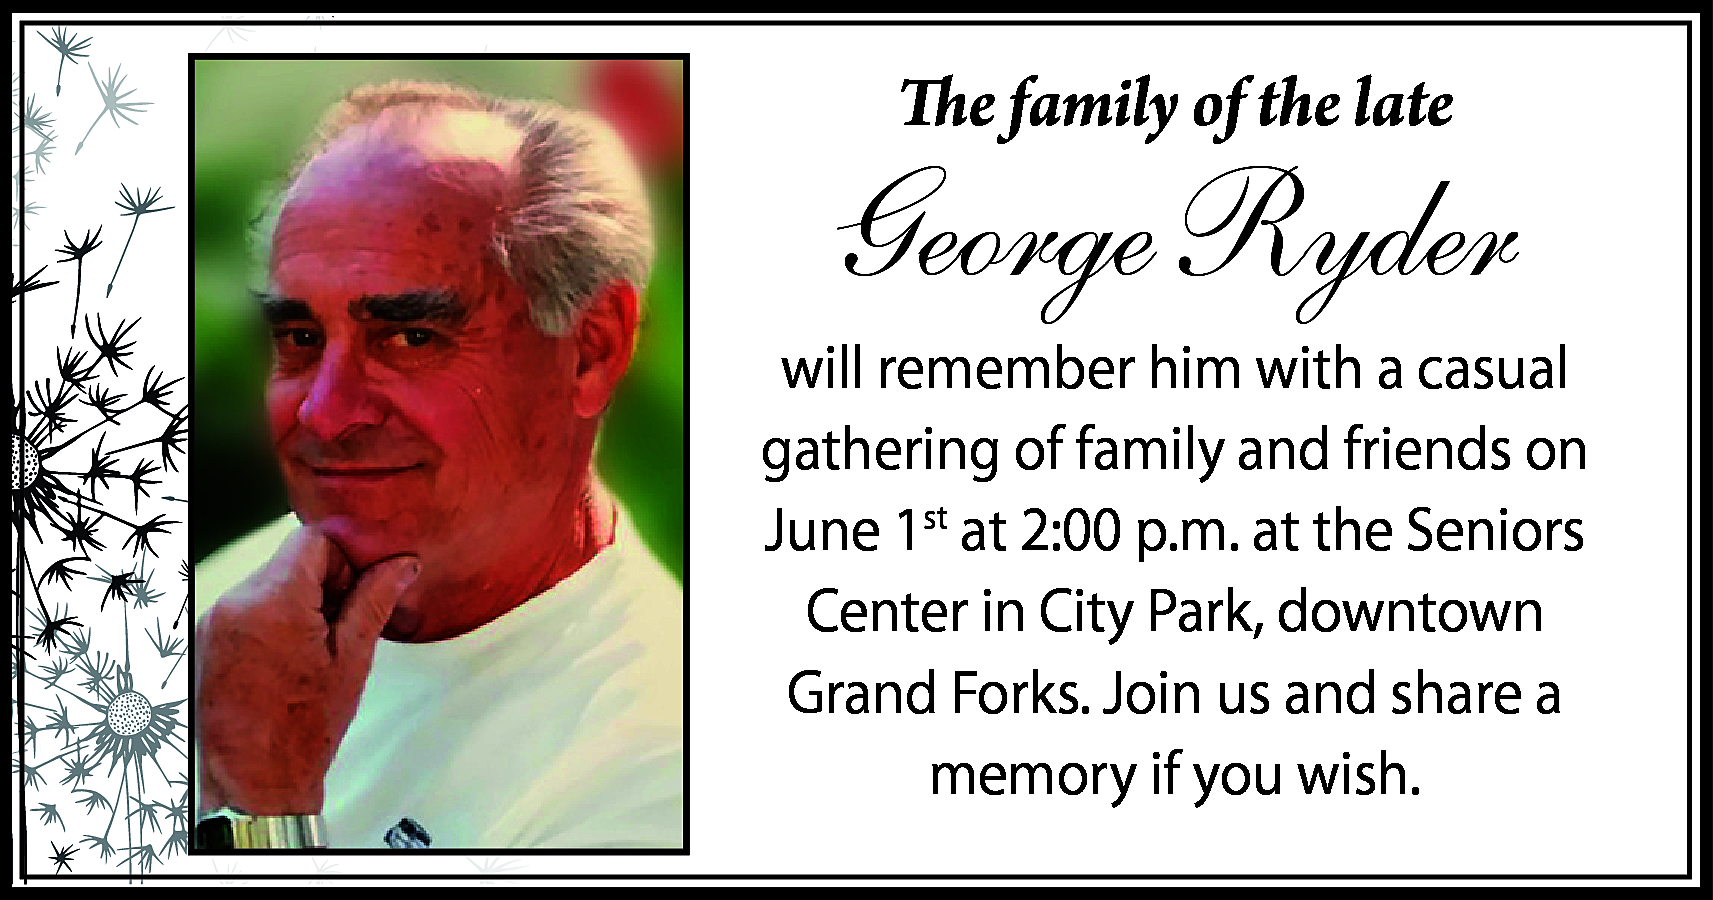 The family of the late  The family of the late    George Ryder  will remember him with a casual  gathering of family and friends on  June 1st at 2:00 p.m. at the Seniors  Center in City Park, downtown  Grand Forks. Join us and share a  memory if you wish.    